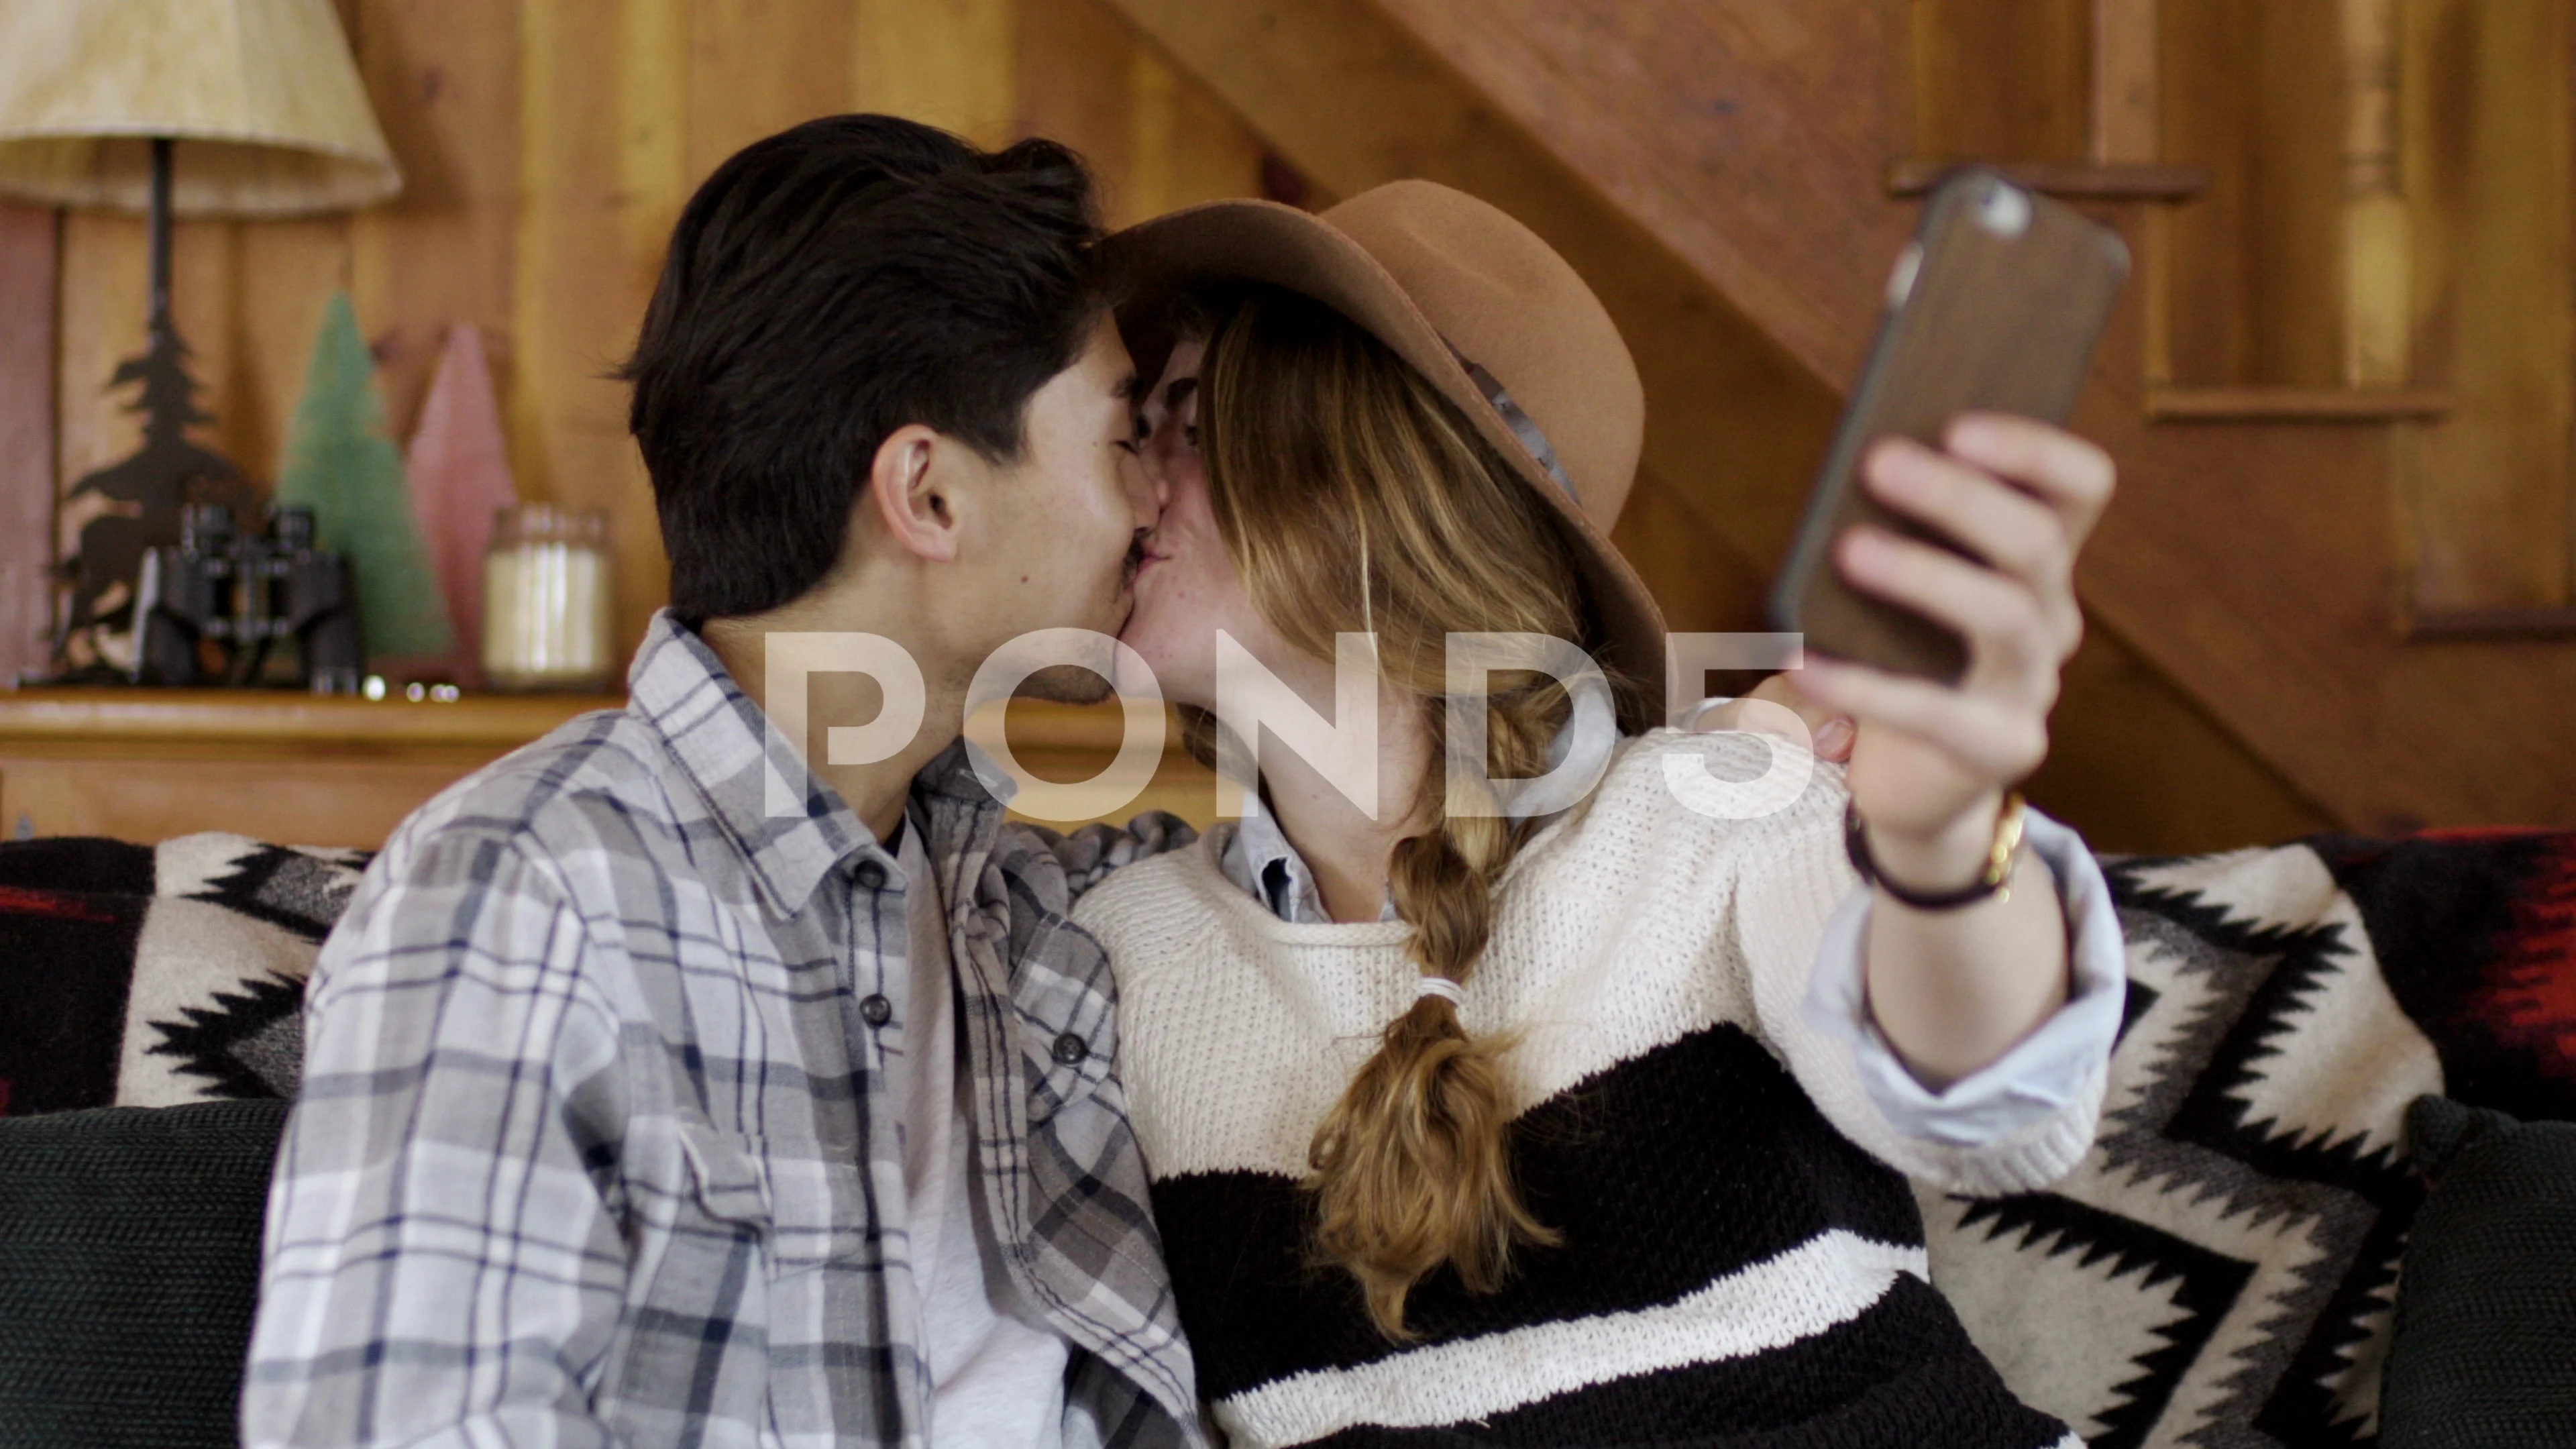 Mirror selfie kiss | Cute couples kissing, Couples poses for pictures, Cute  couple poses